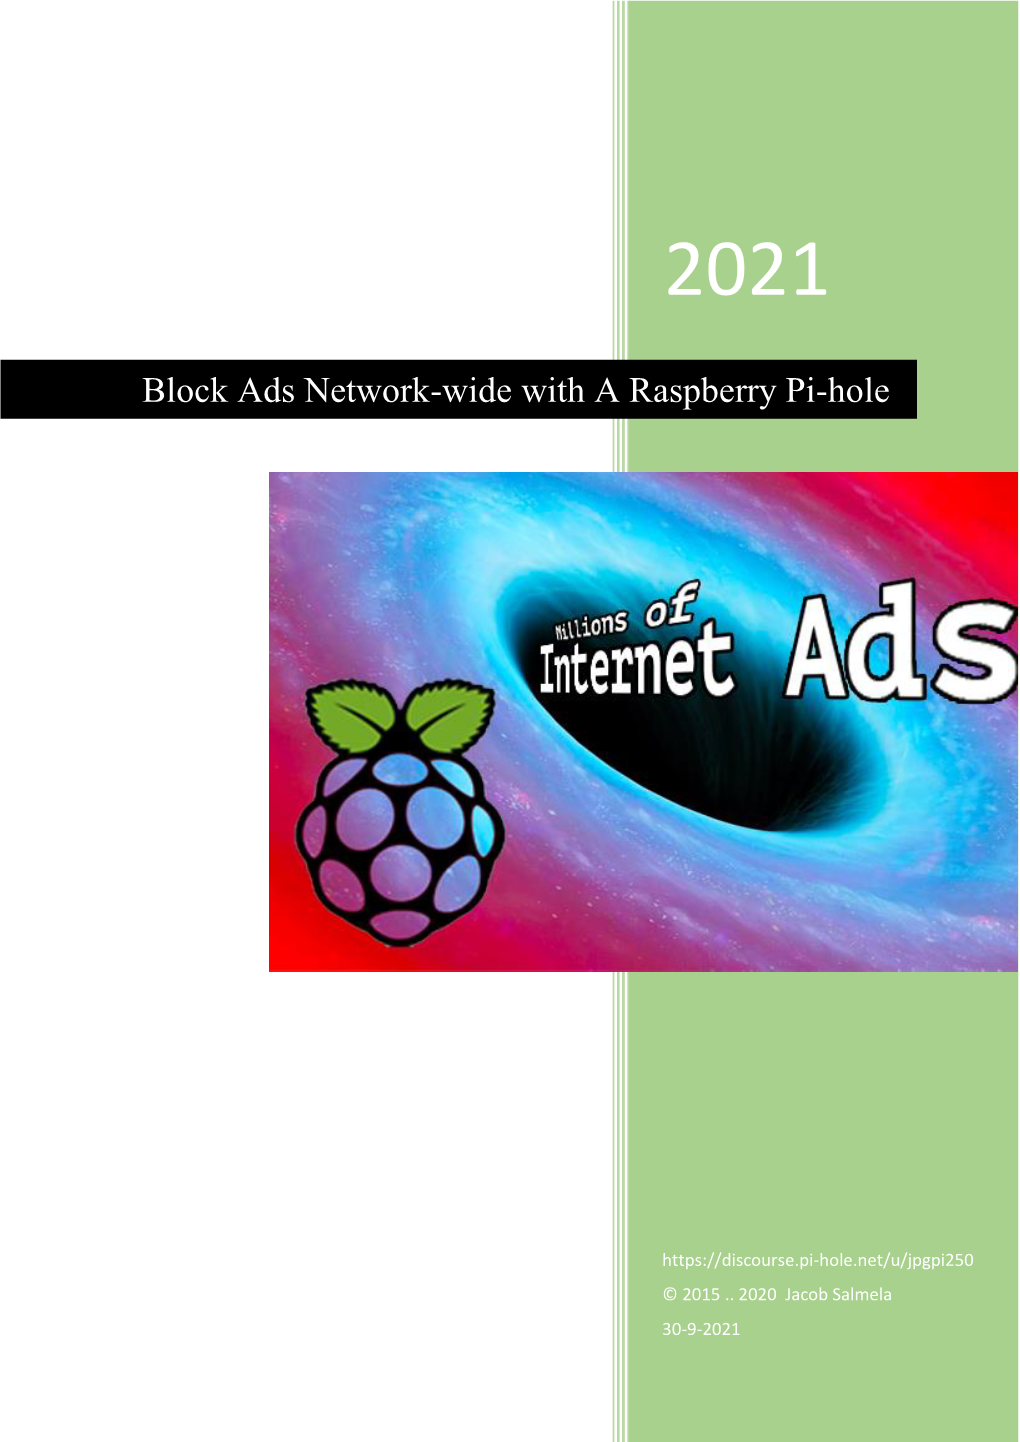 Block Ads Network-Wide with a Raspberry Pi-Hole